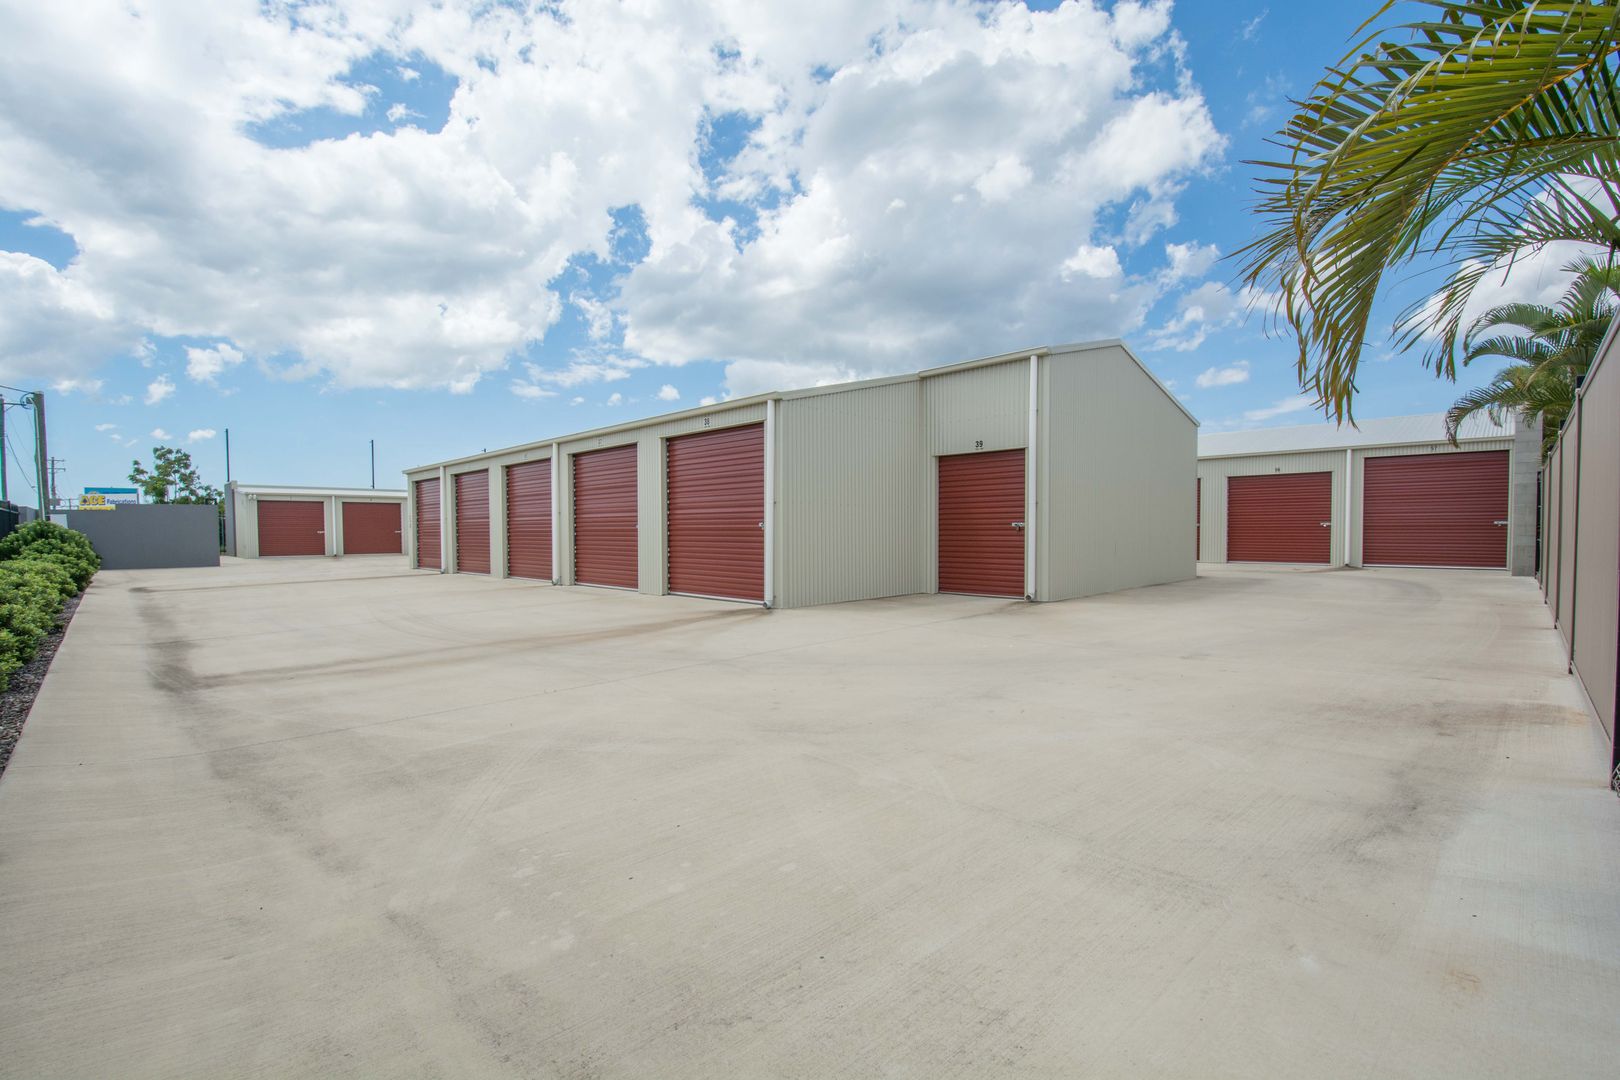 STORAGE SHEDS, Norville QLD 4670 house for Rent, $30 ...